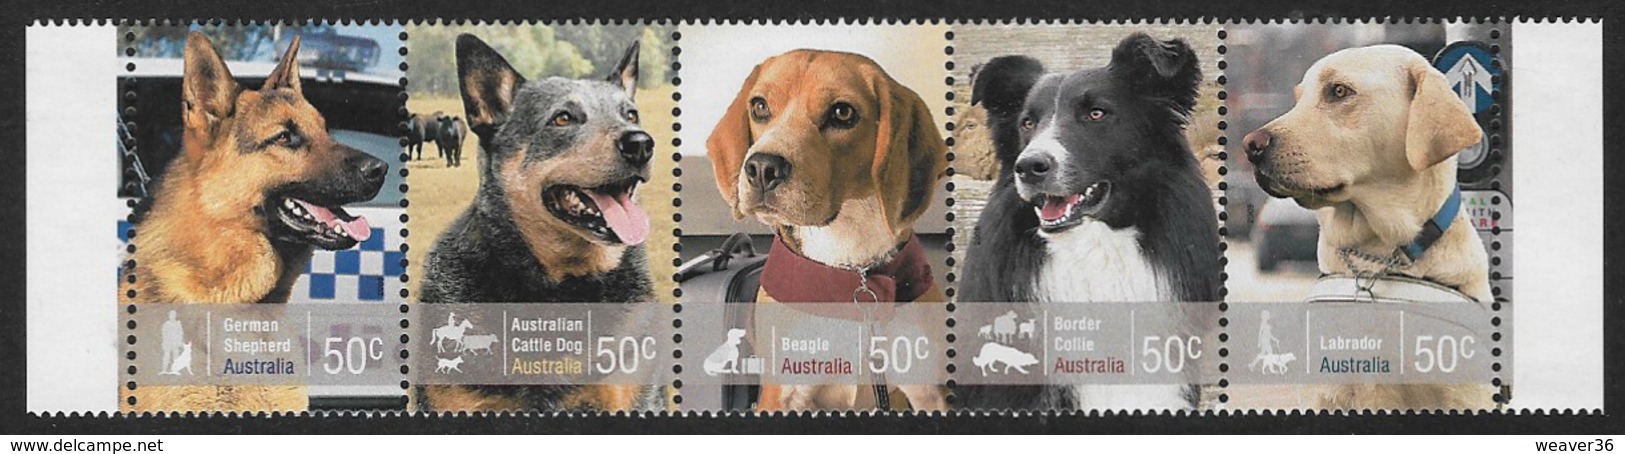 Australia SG3000-3004 2008 Working Dogs Set 5v Complete Unmounted Mint [2/1959/6D] - Mint Stamps